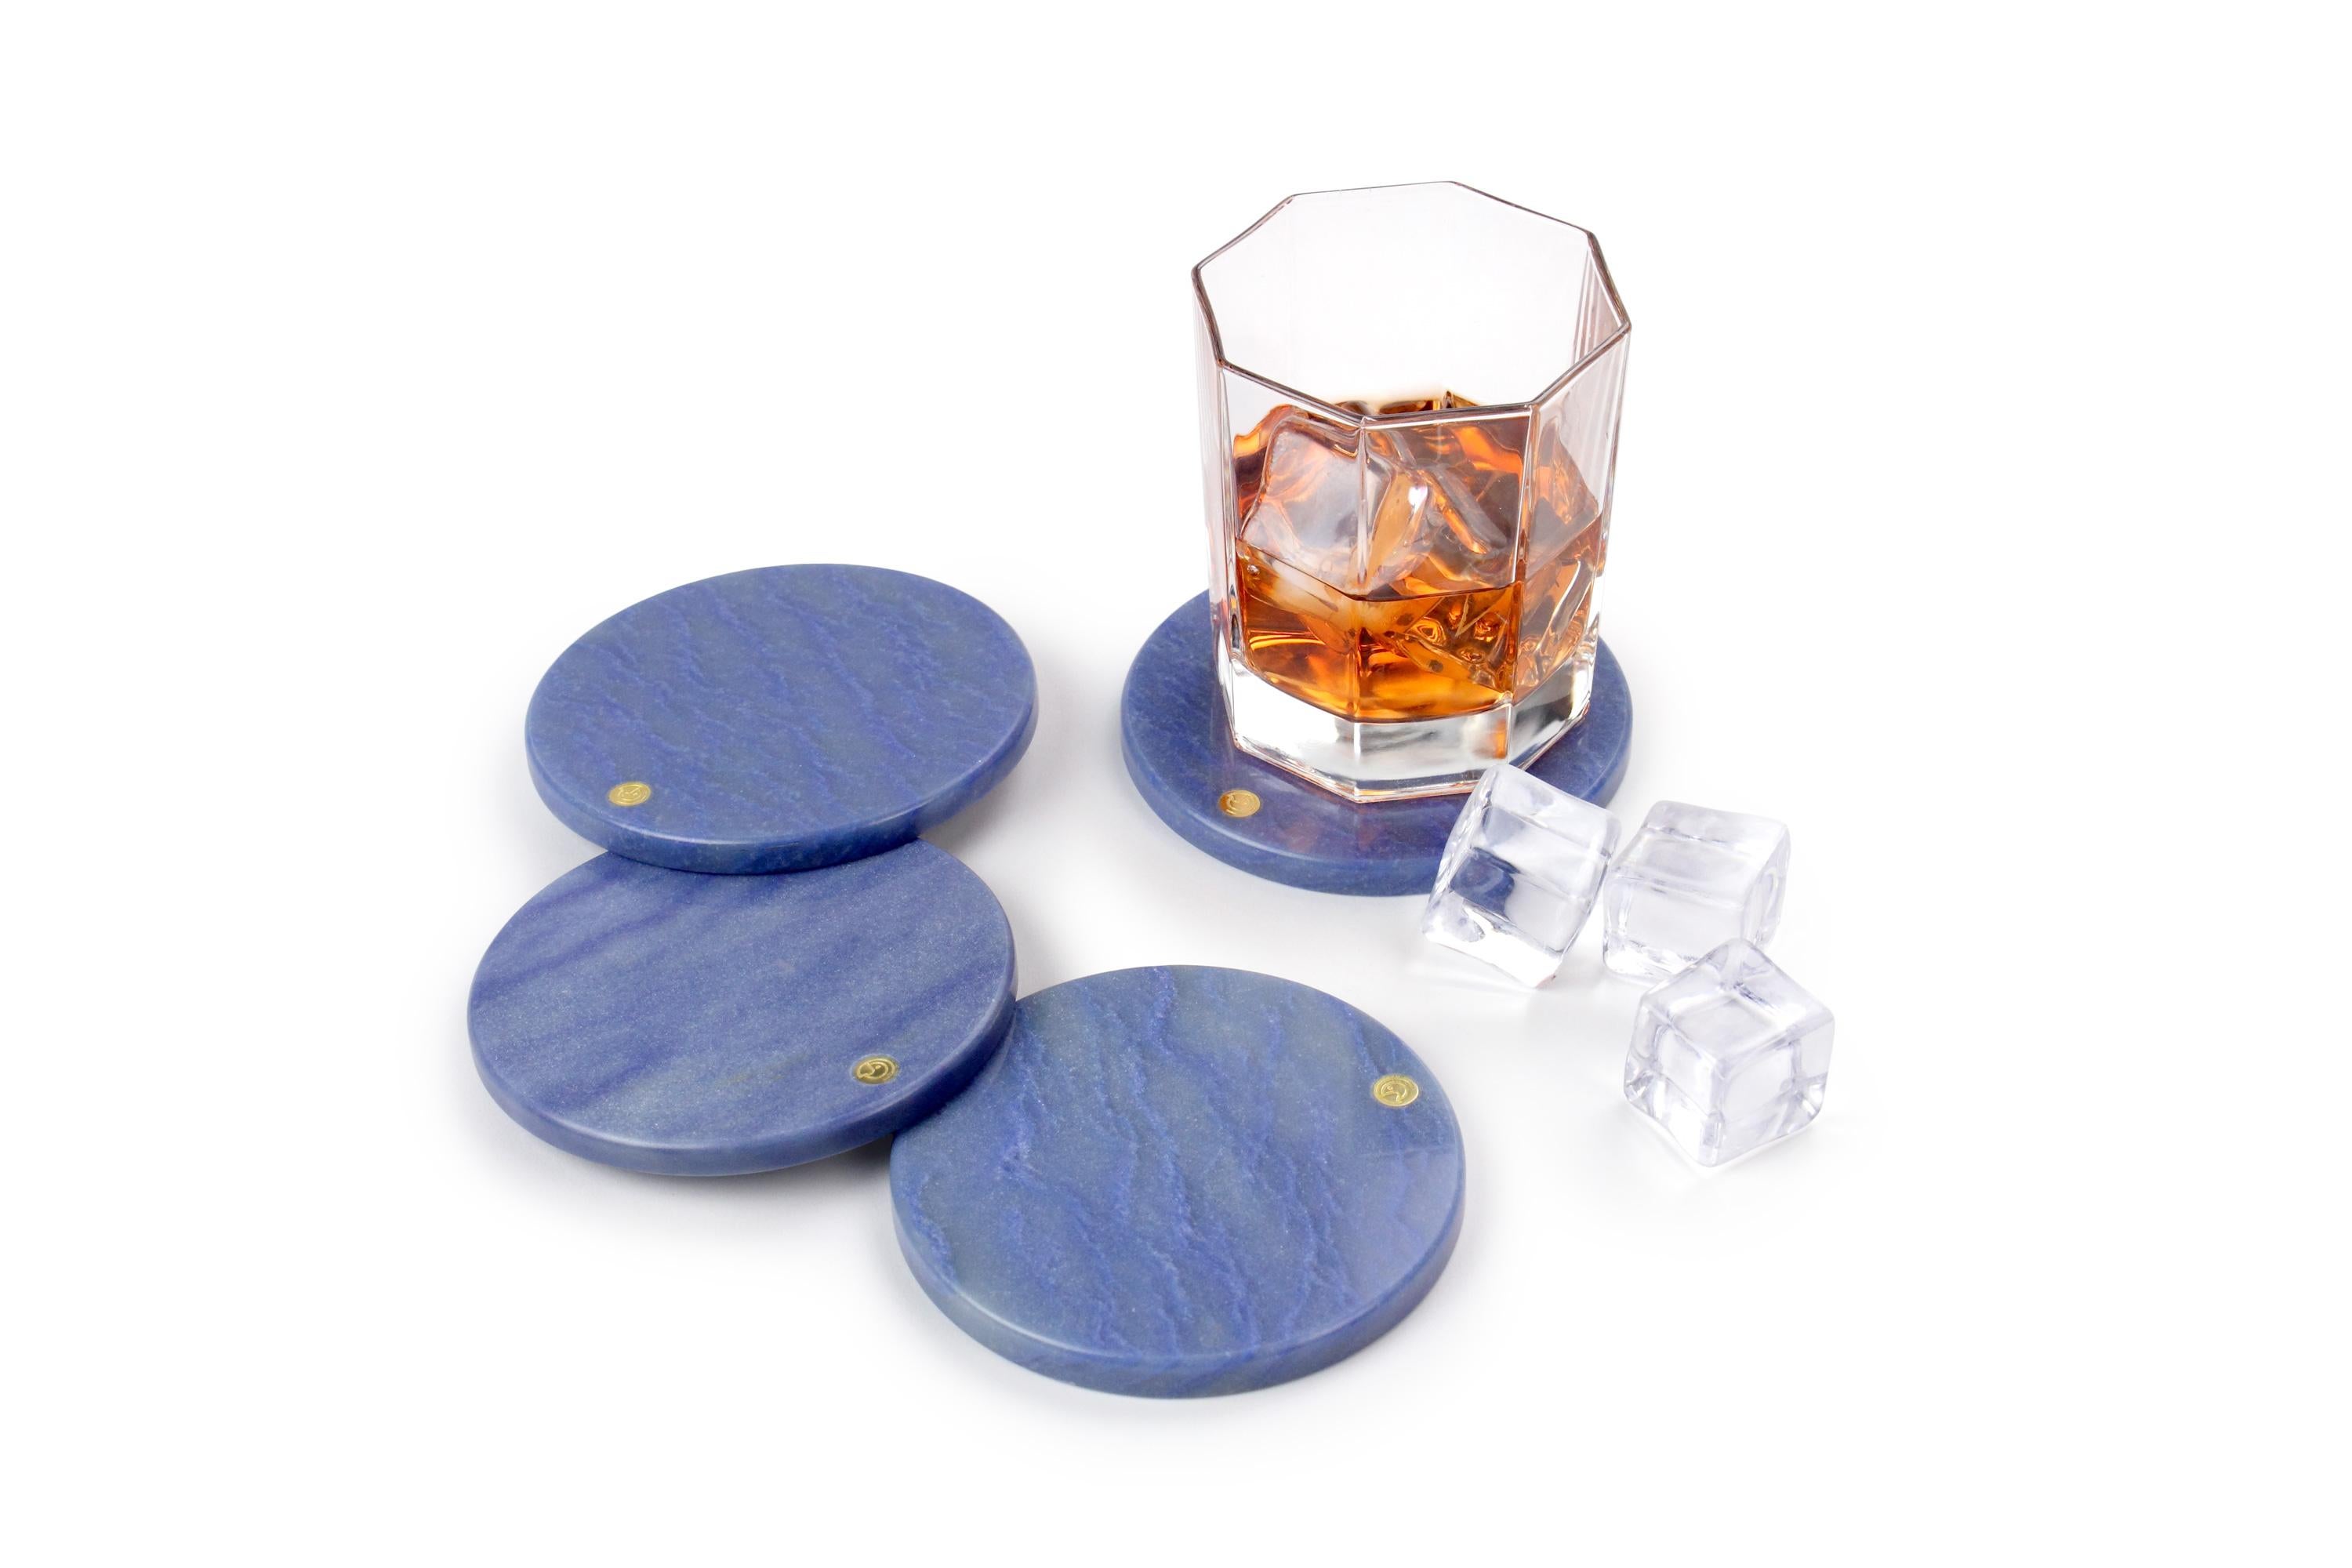 Set of 4 coasters in Azul Macaubas.
Thanks to their shape and size they can be used as exclusive presentation plates for finger food.

Dimensions: D 10, H 0.8 cm
Also available: Square L 10, W 10, H 0.8 cm
Available in different marbles, onyx and